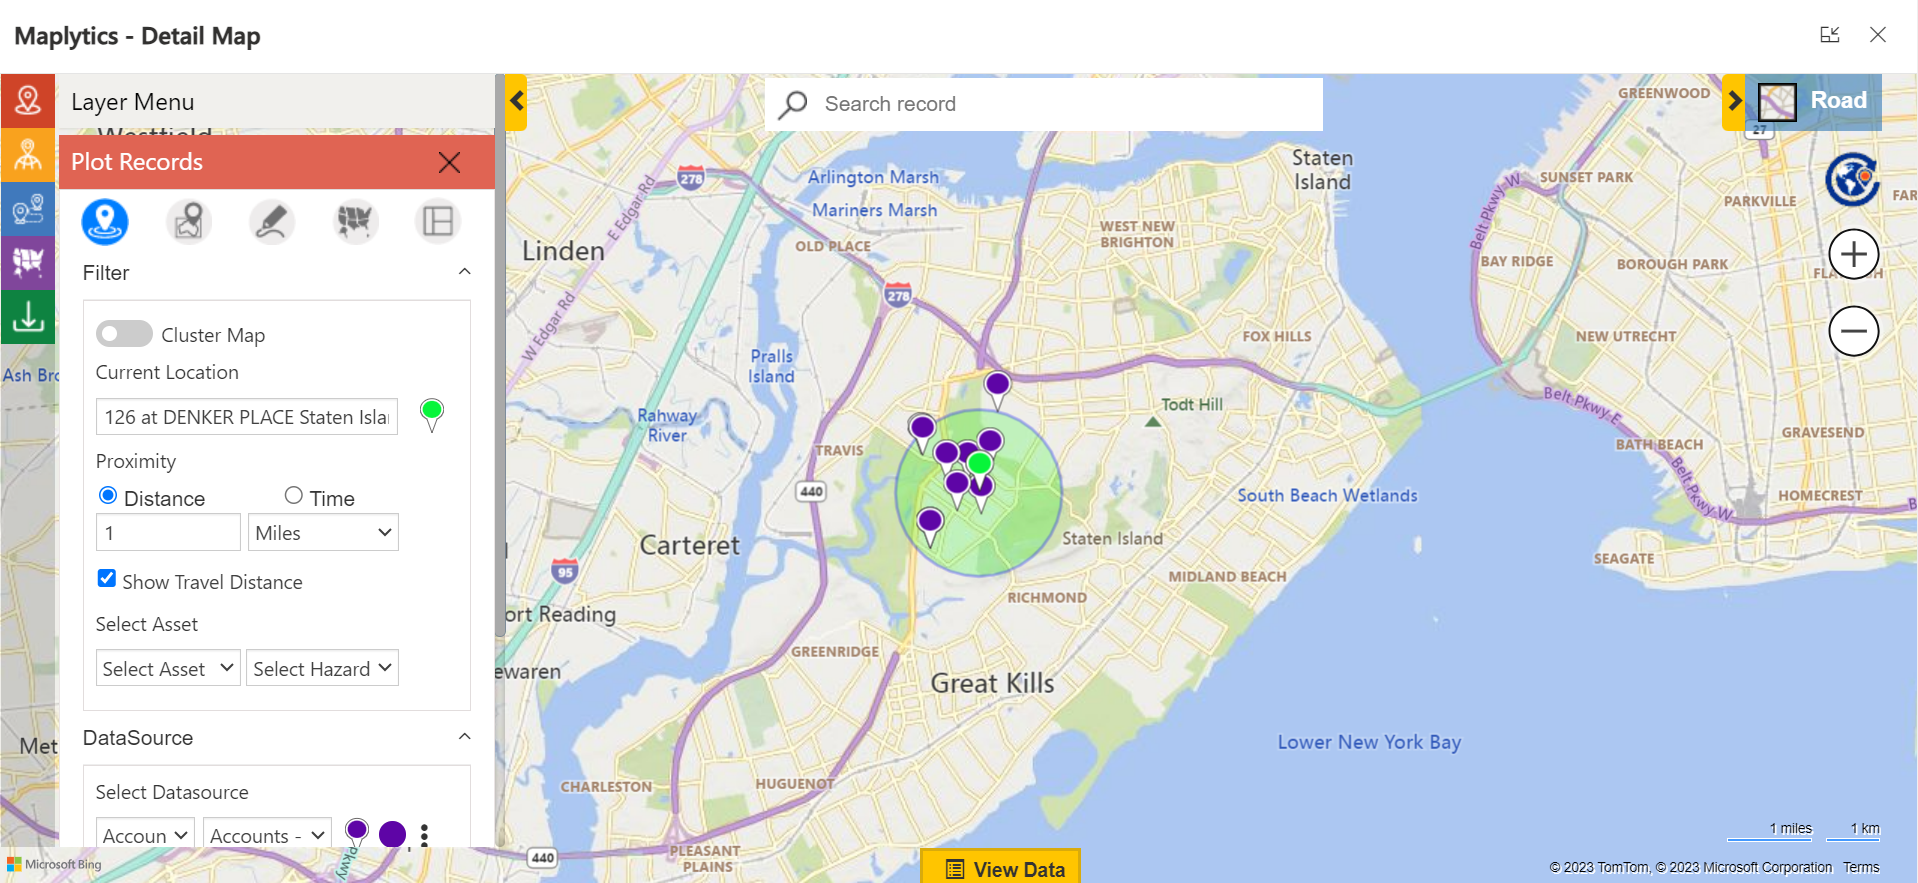 find sales leads around you with integrated maps